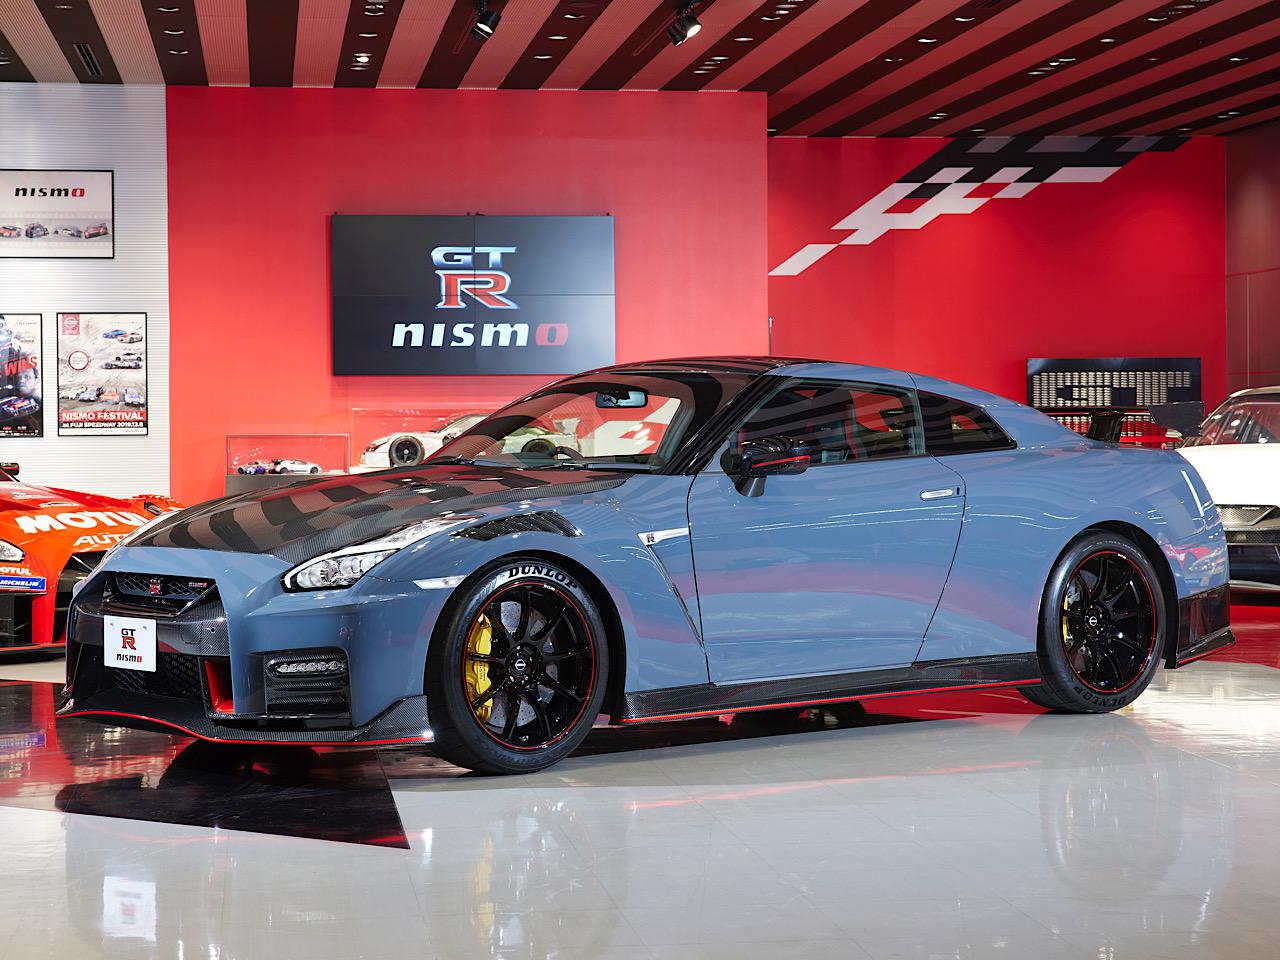 The Nissan GT-R NISMO Special Edition arrives in the U.S. later this year